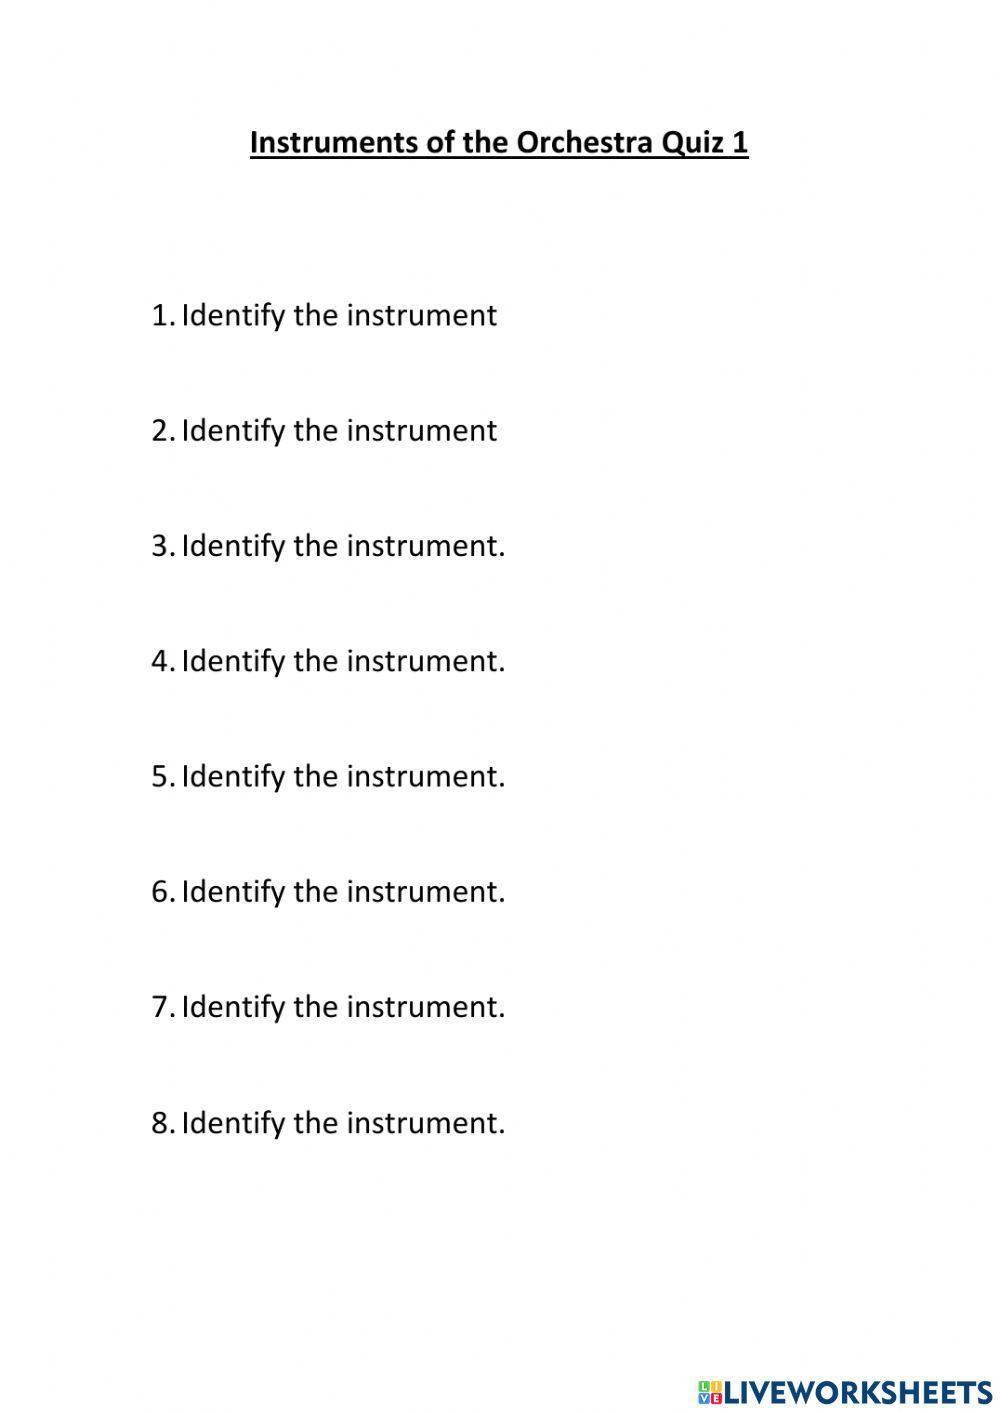 Instruments of the Orchestra Quiz 1